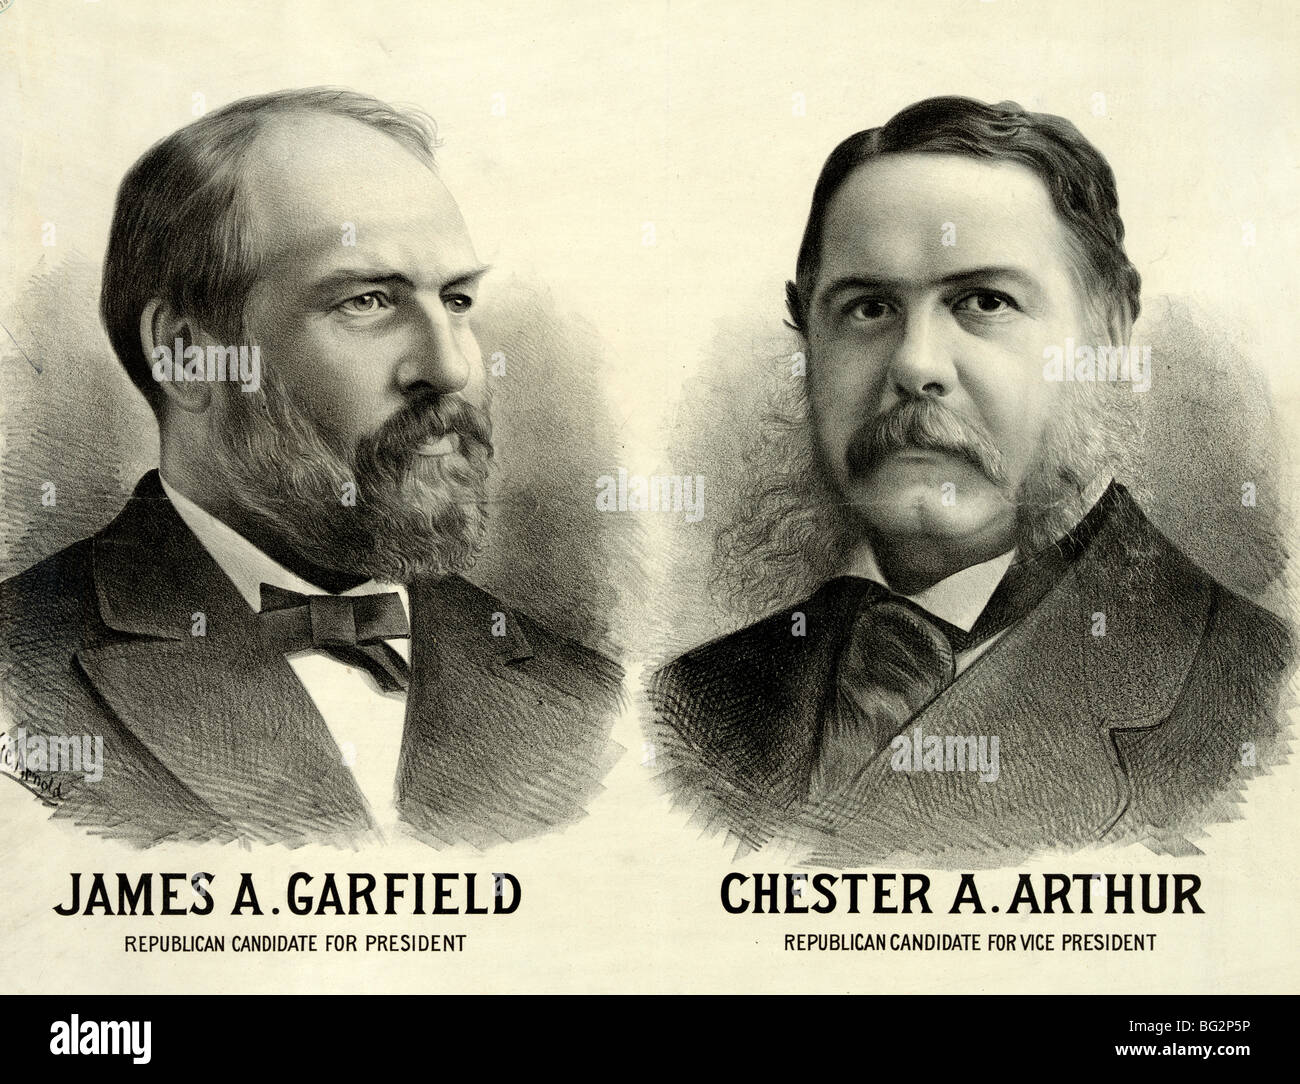 James A. Garfield, bust portrait,  and Chester A. Arthur, bust portrait, facing front, 1880 USA Presidential Election Stock Photo